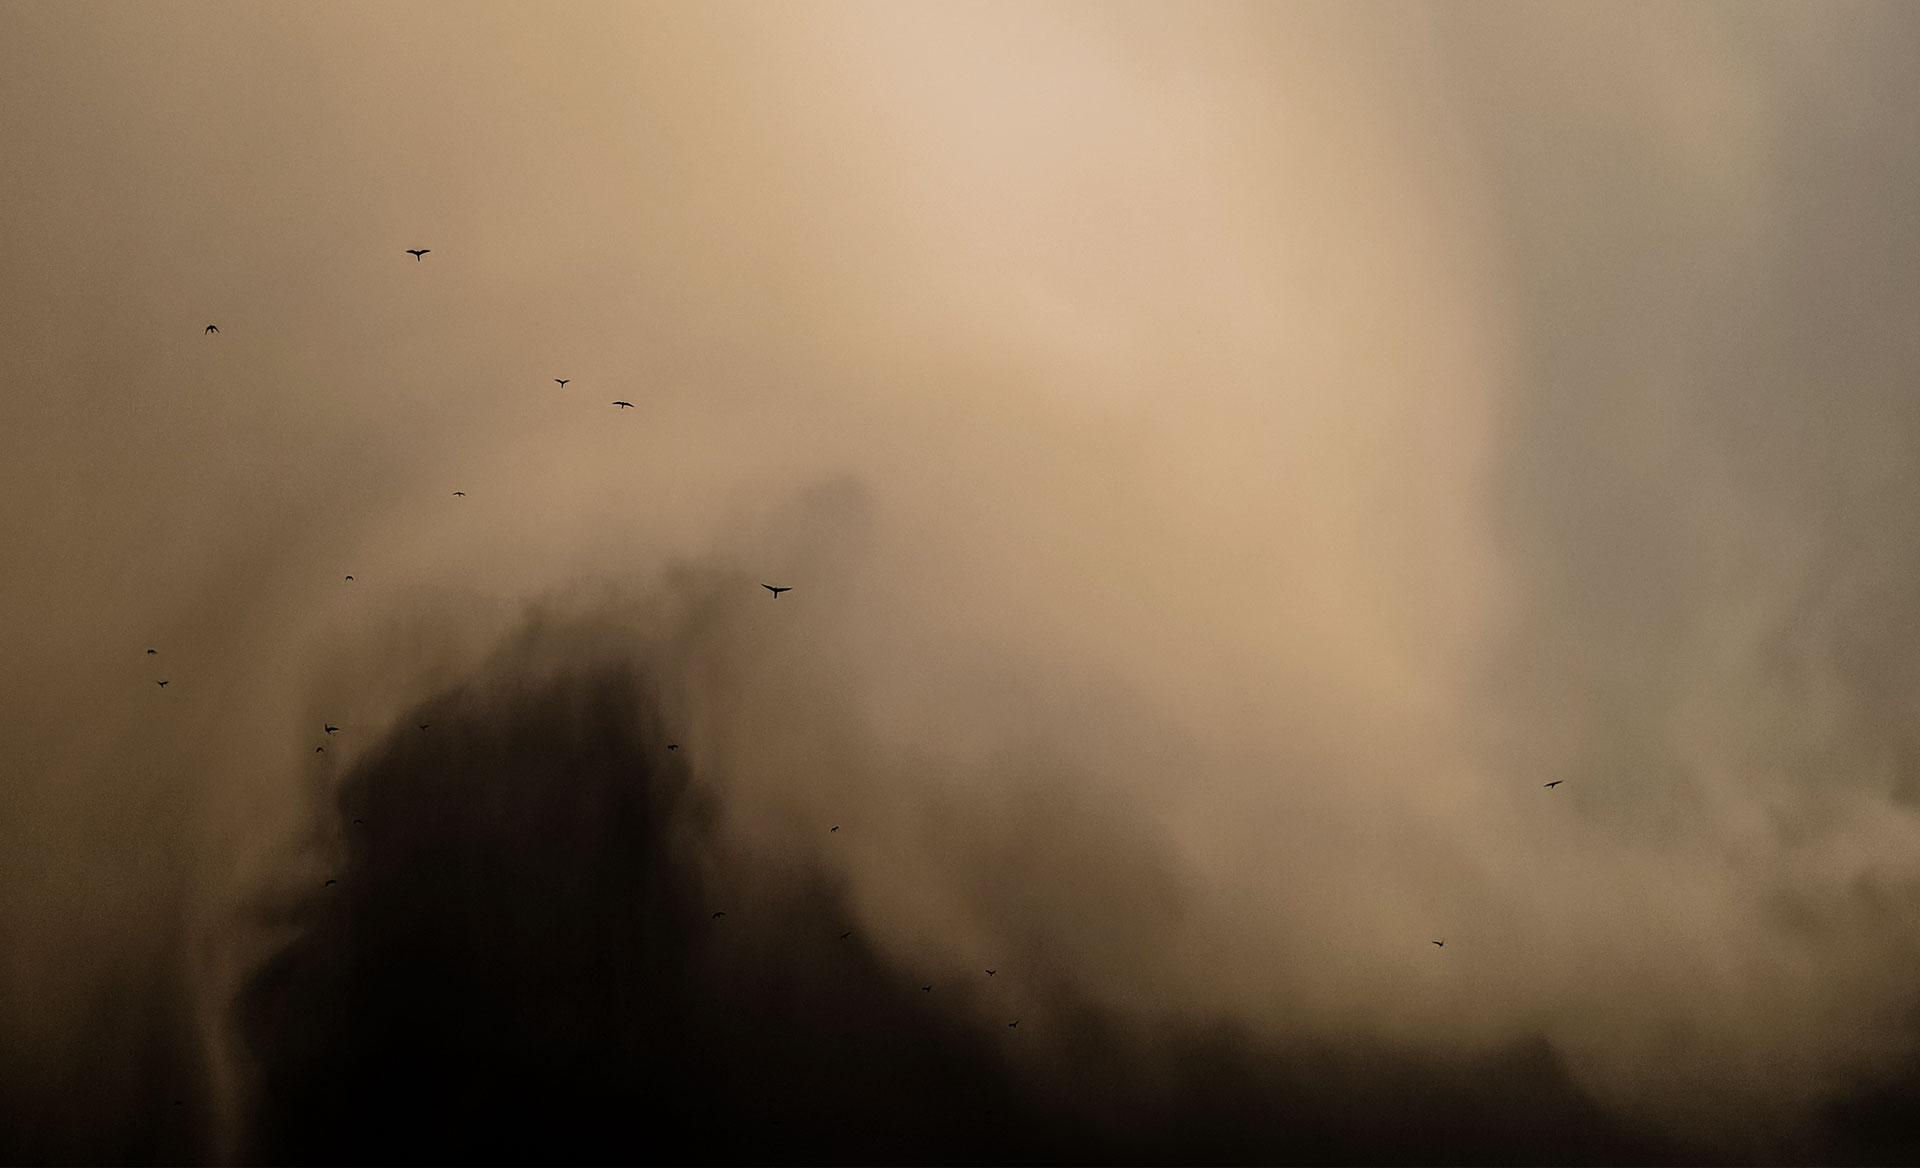 A picture of an abstract scene of smoke wisps, conveying an ominous atmosphere of fear and anxiety.